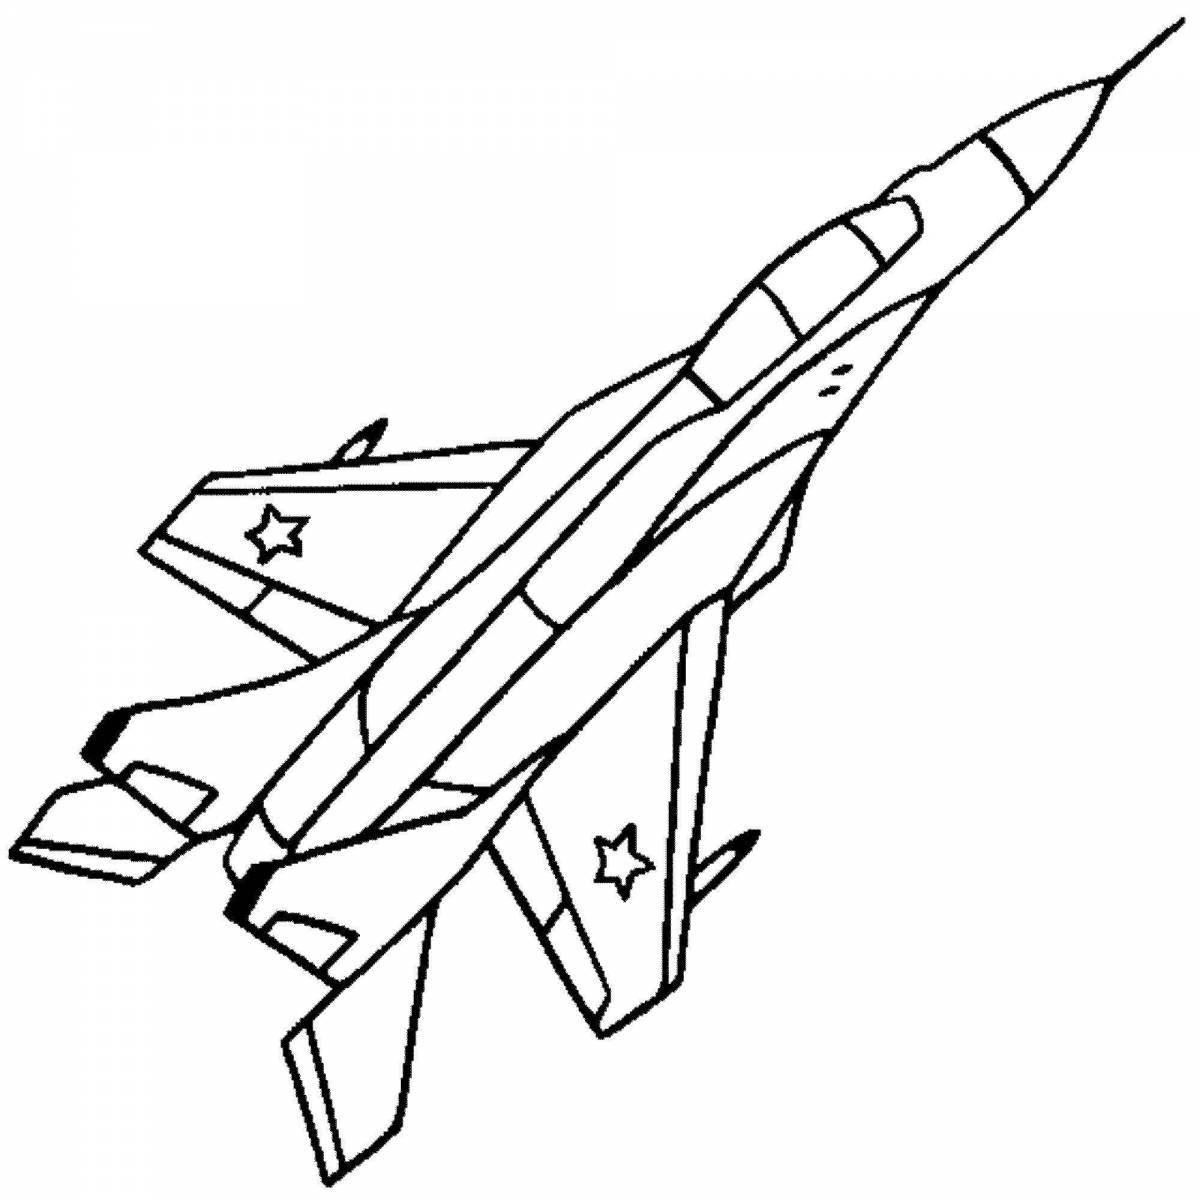 Coloring book shiny military fighter